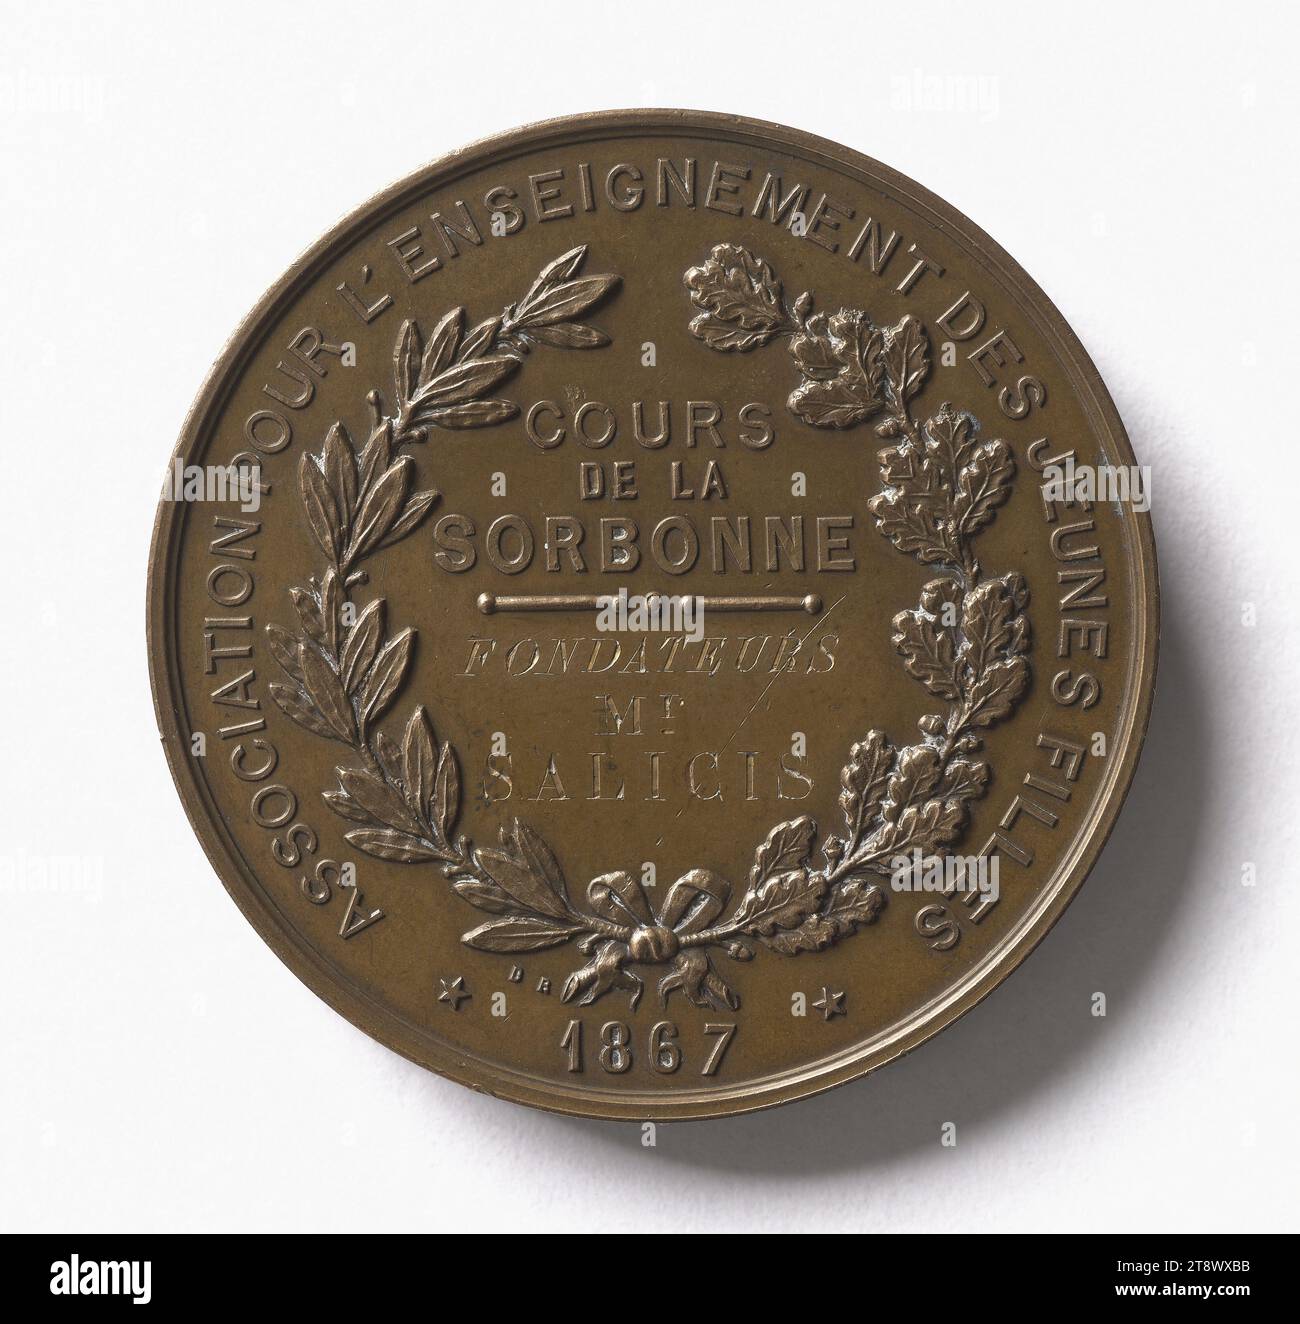 Medal attributed to Gustave Salicis (1818-1889), founder of the Sorbonne courses for young girls, 1867, Bovy, Antoine, Engraver in medals, Peyre, Jules Constant, Draftsman, Desaide-Roquelay (Father), Engraver in medals, En 1867, Numismatics, Medal, Dimensions - Work: Diameter: 4.6 cm, Weight (type dimension): 45.17 g Stock Photo